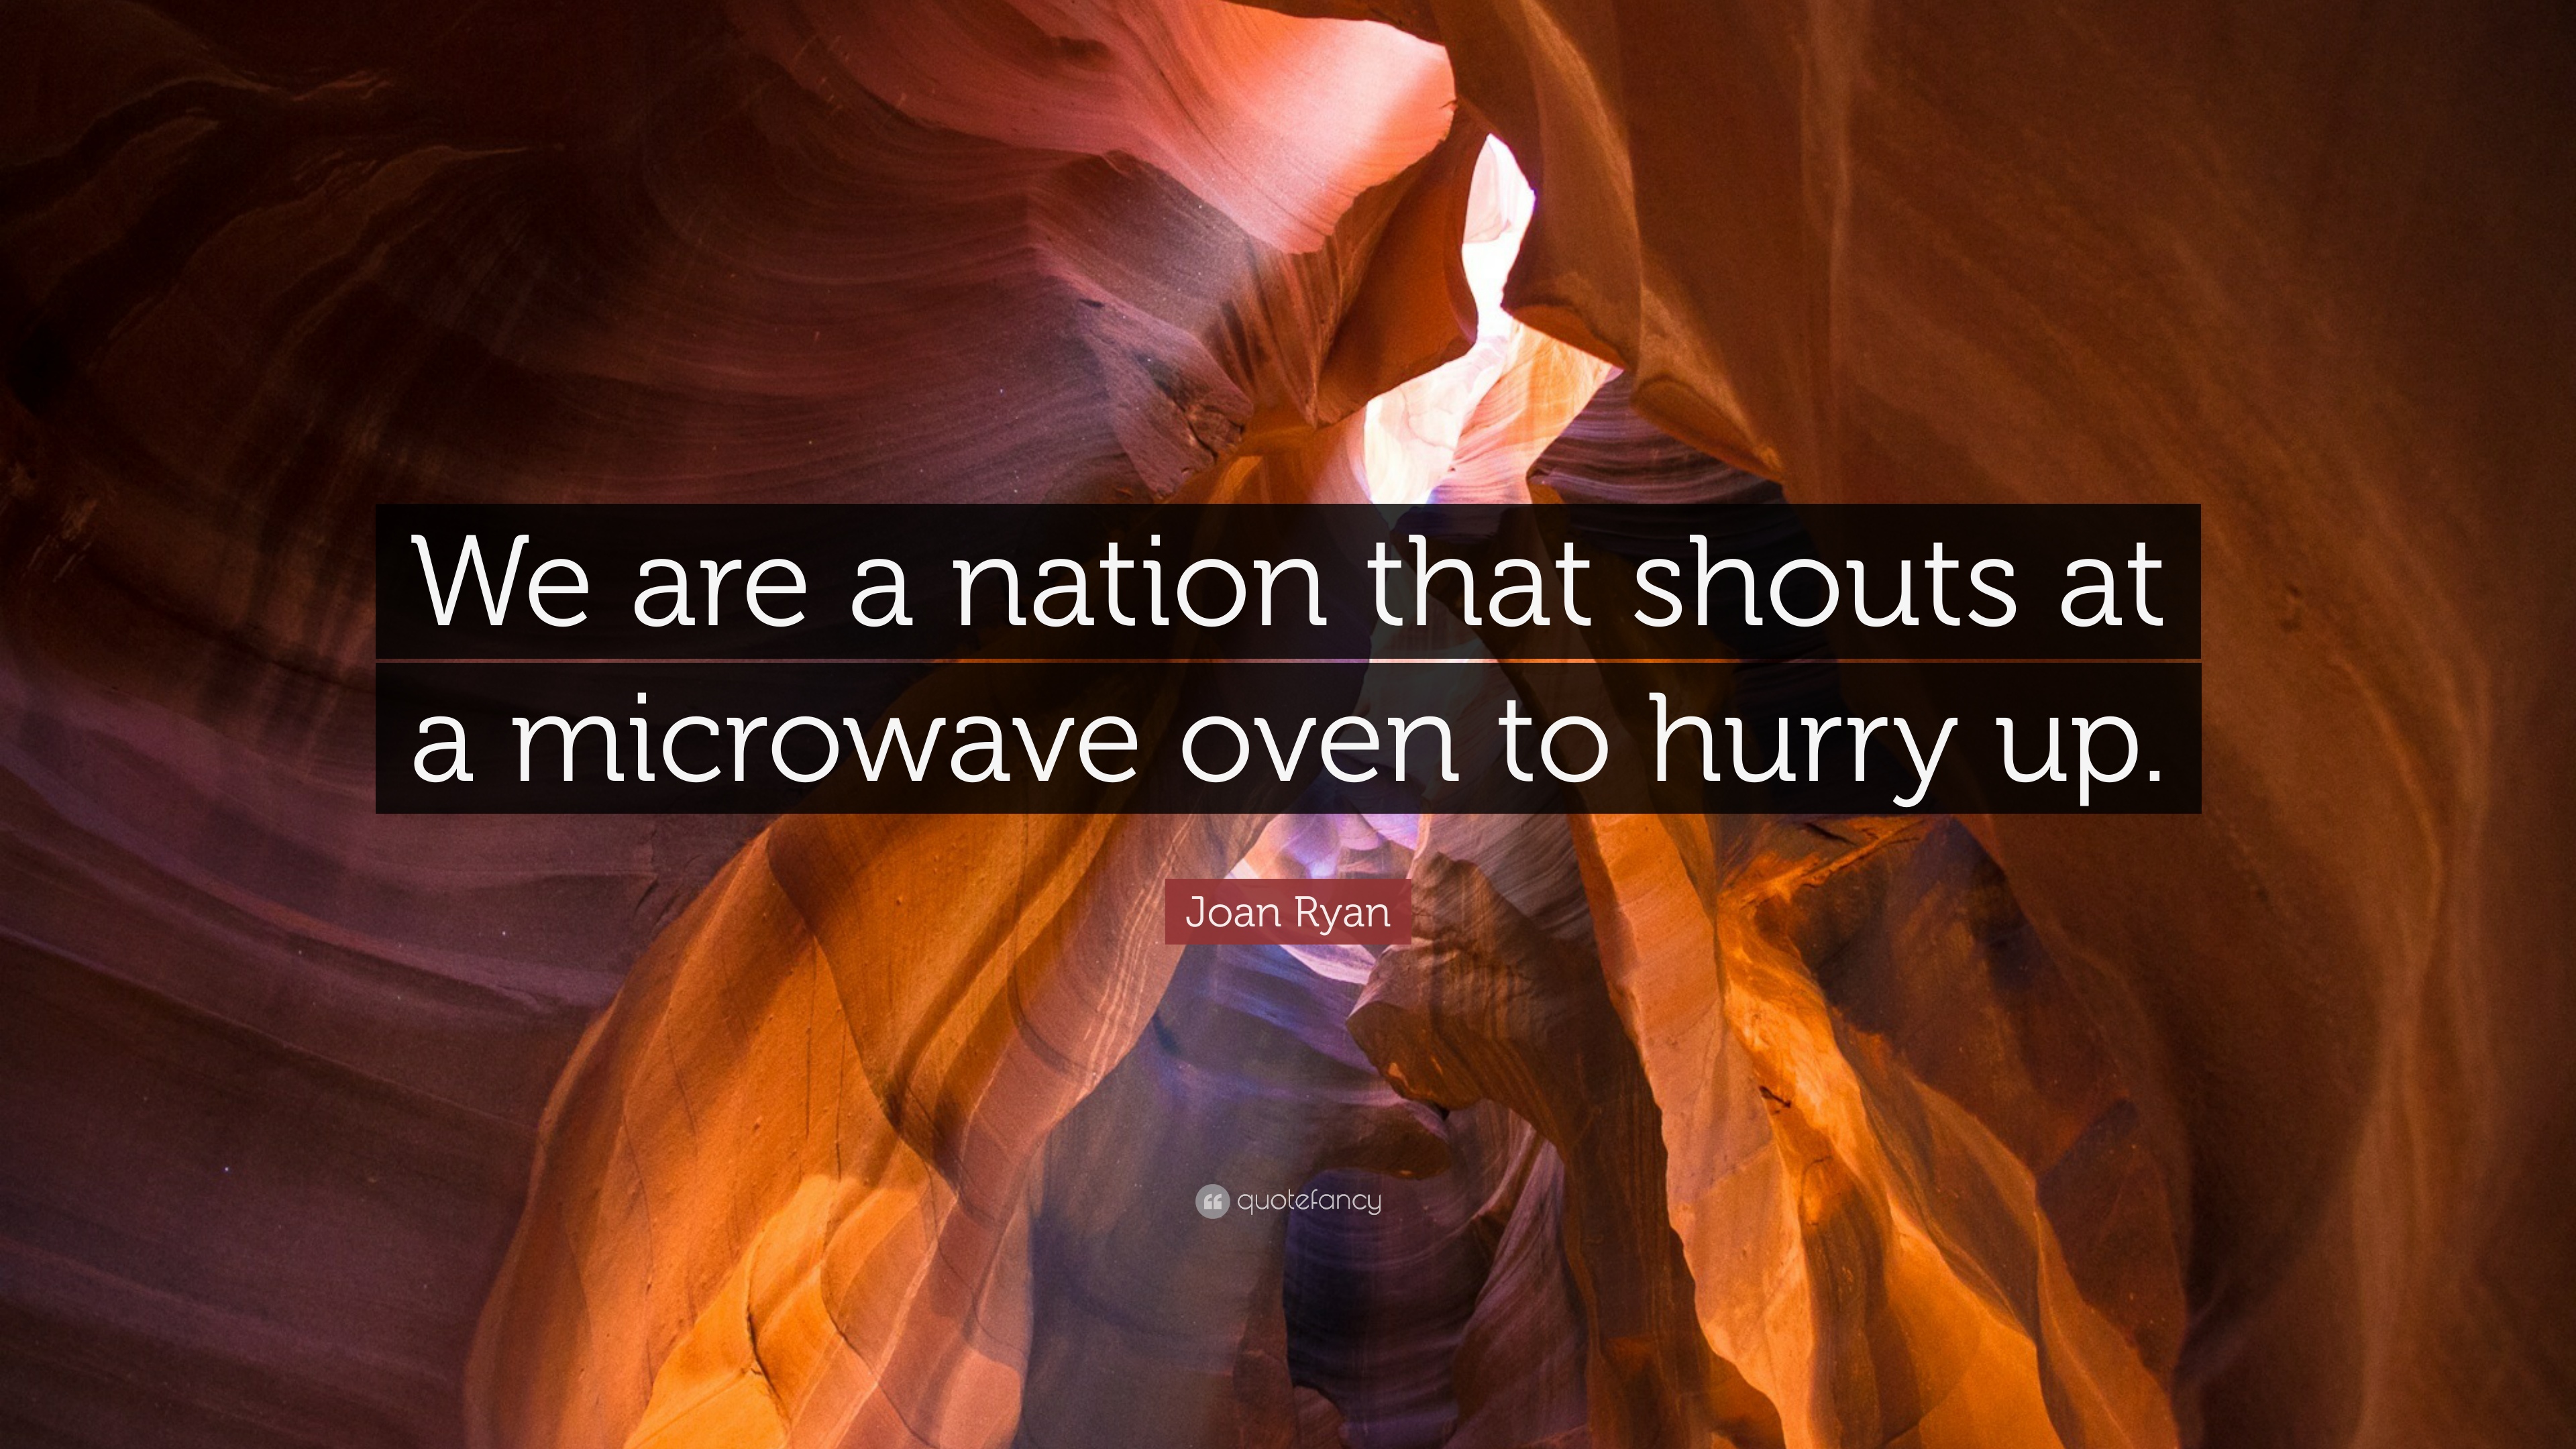 Joan Ryan Quote: “We are a nation that shouts at a microwave oven to